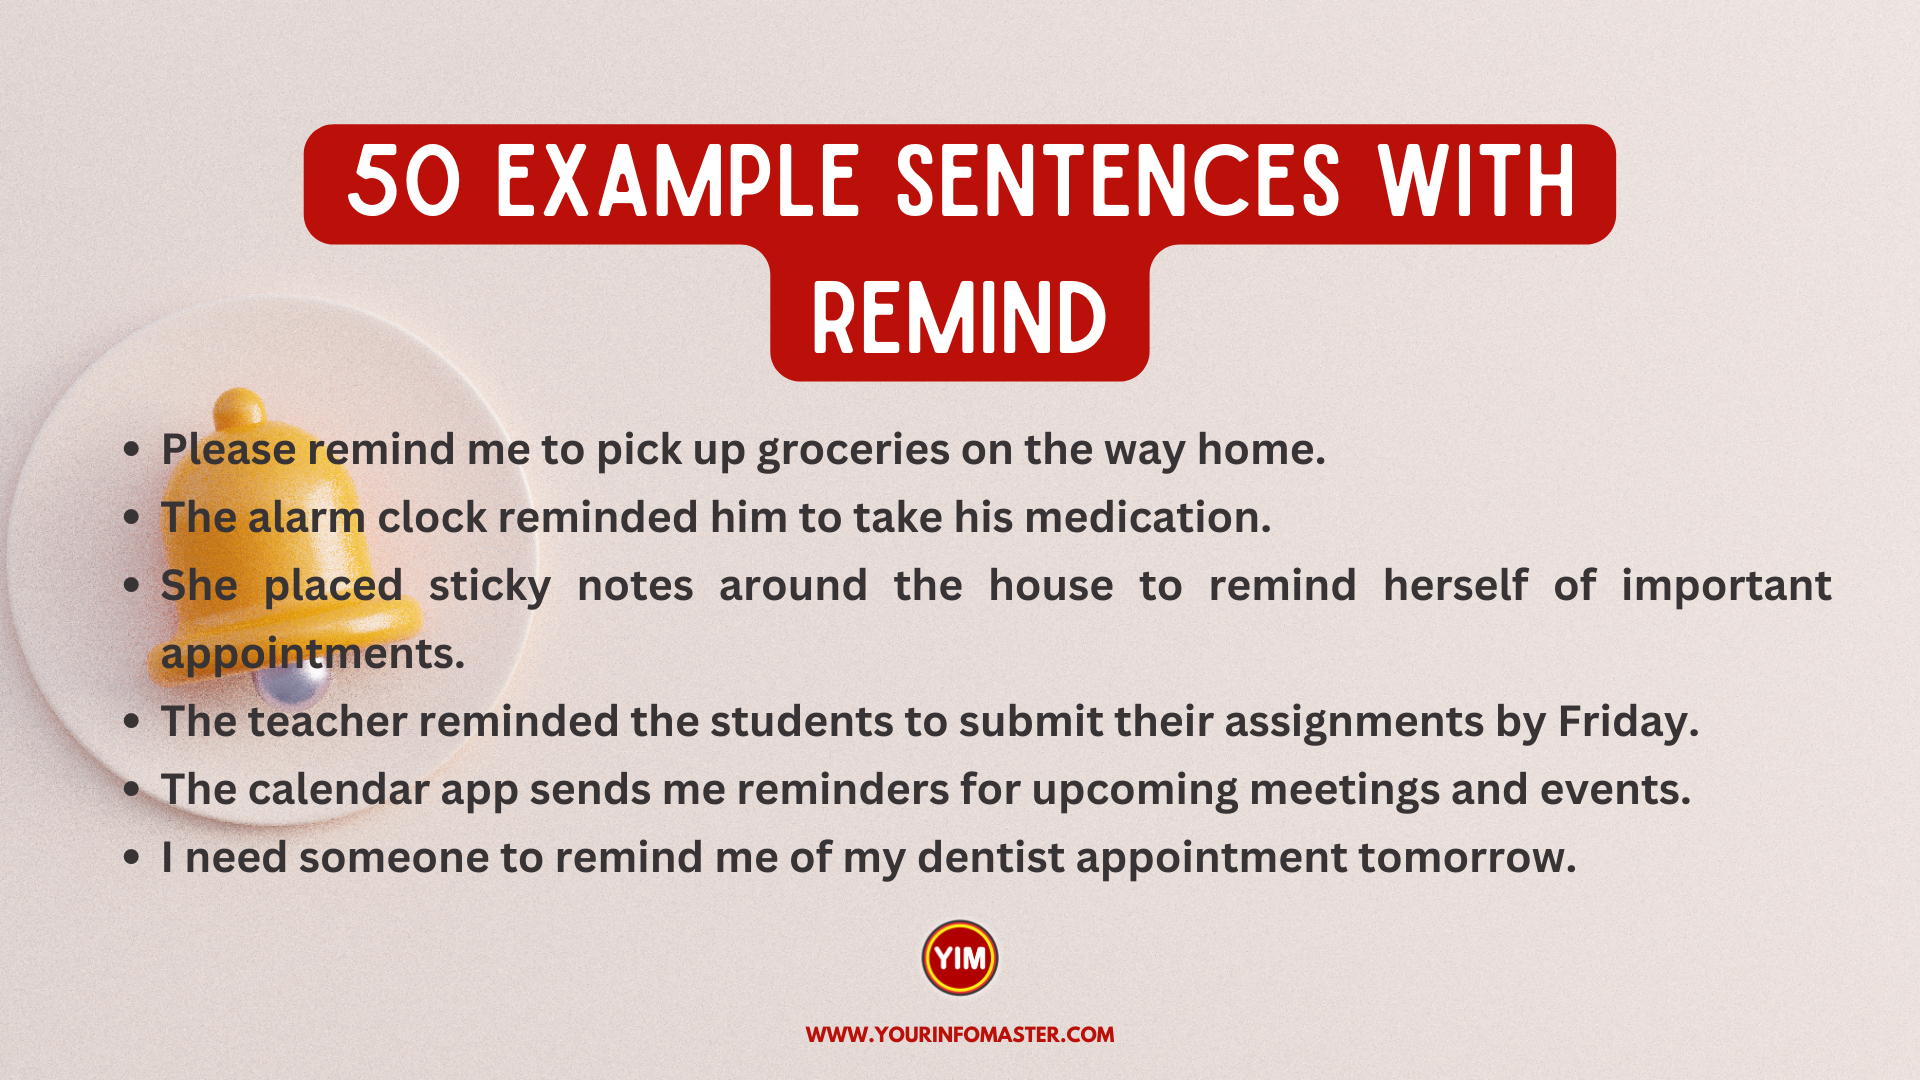 50 Sentences with Remind